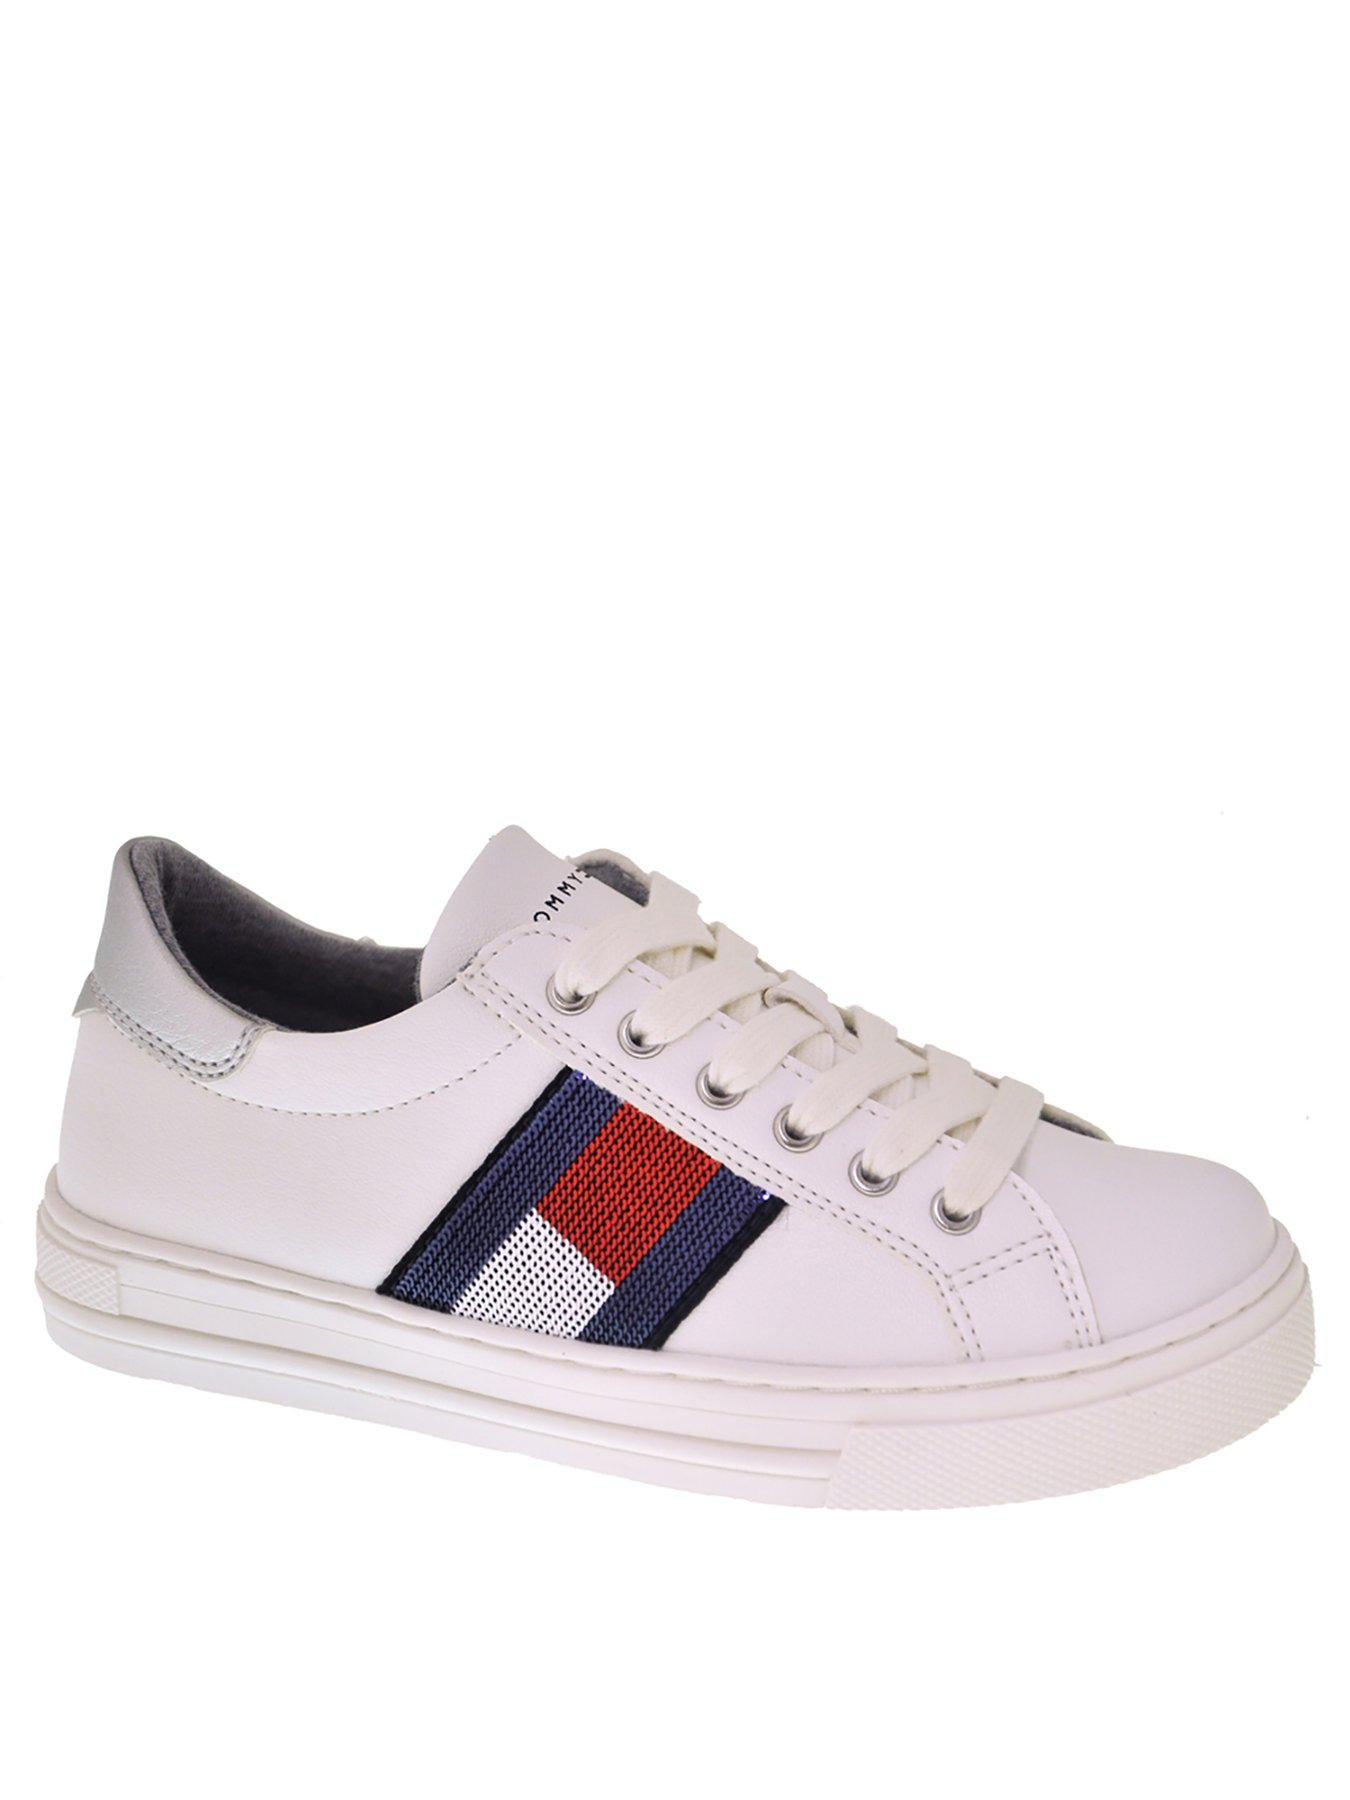 tommy hilfiger playful badge sneakers